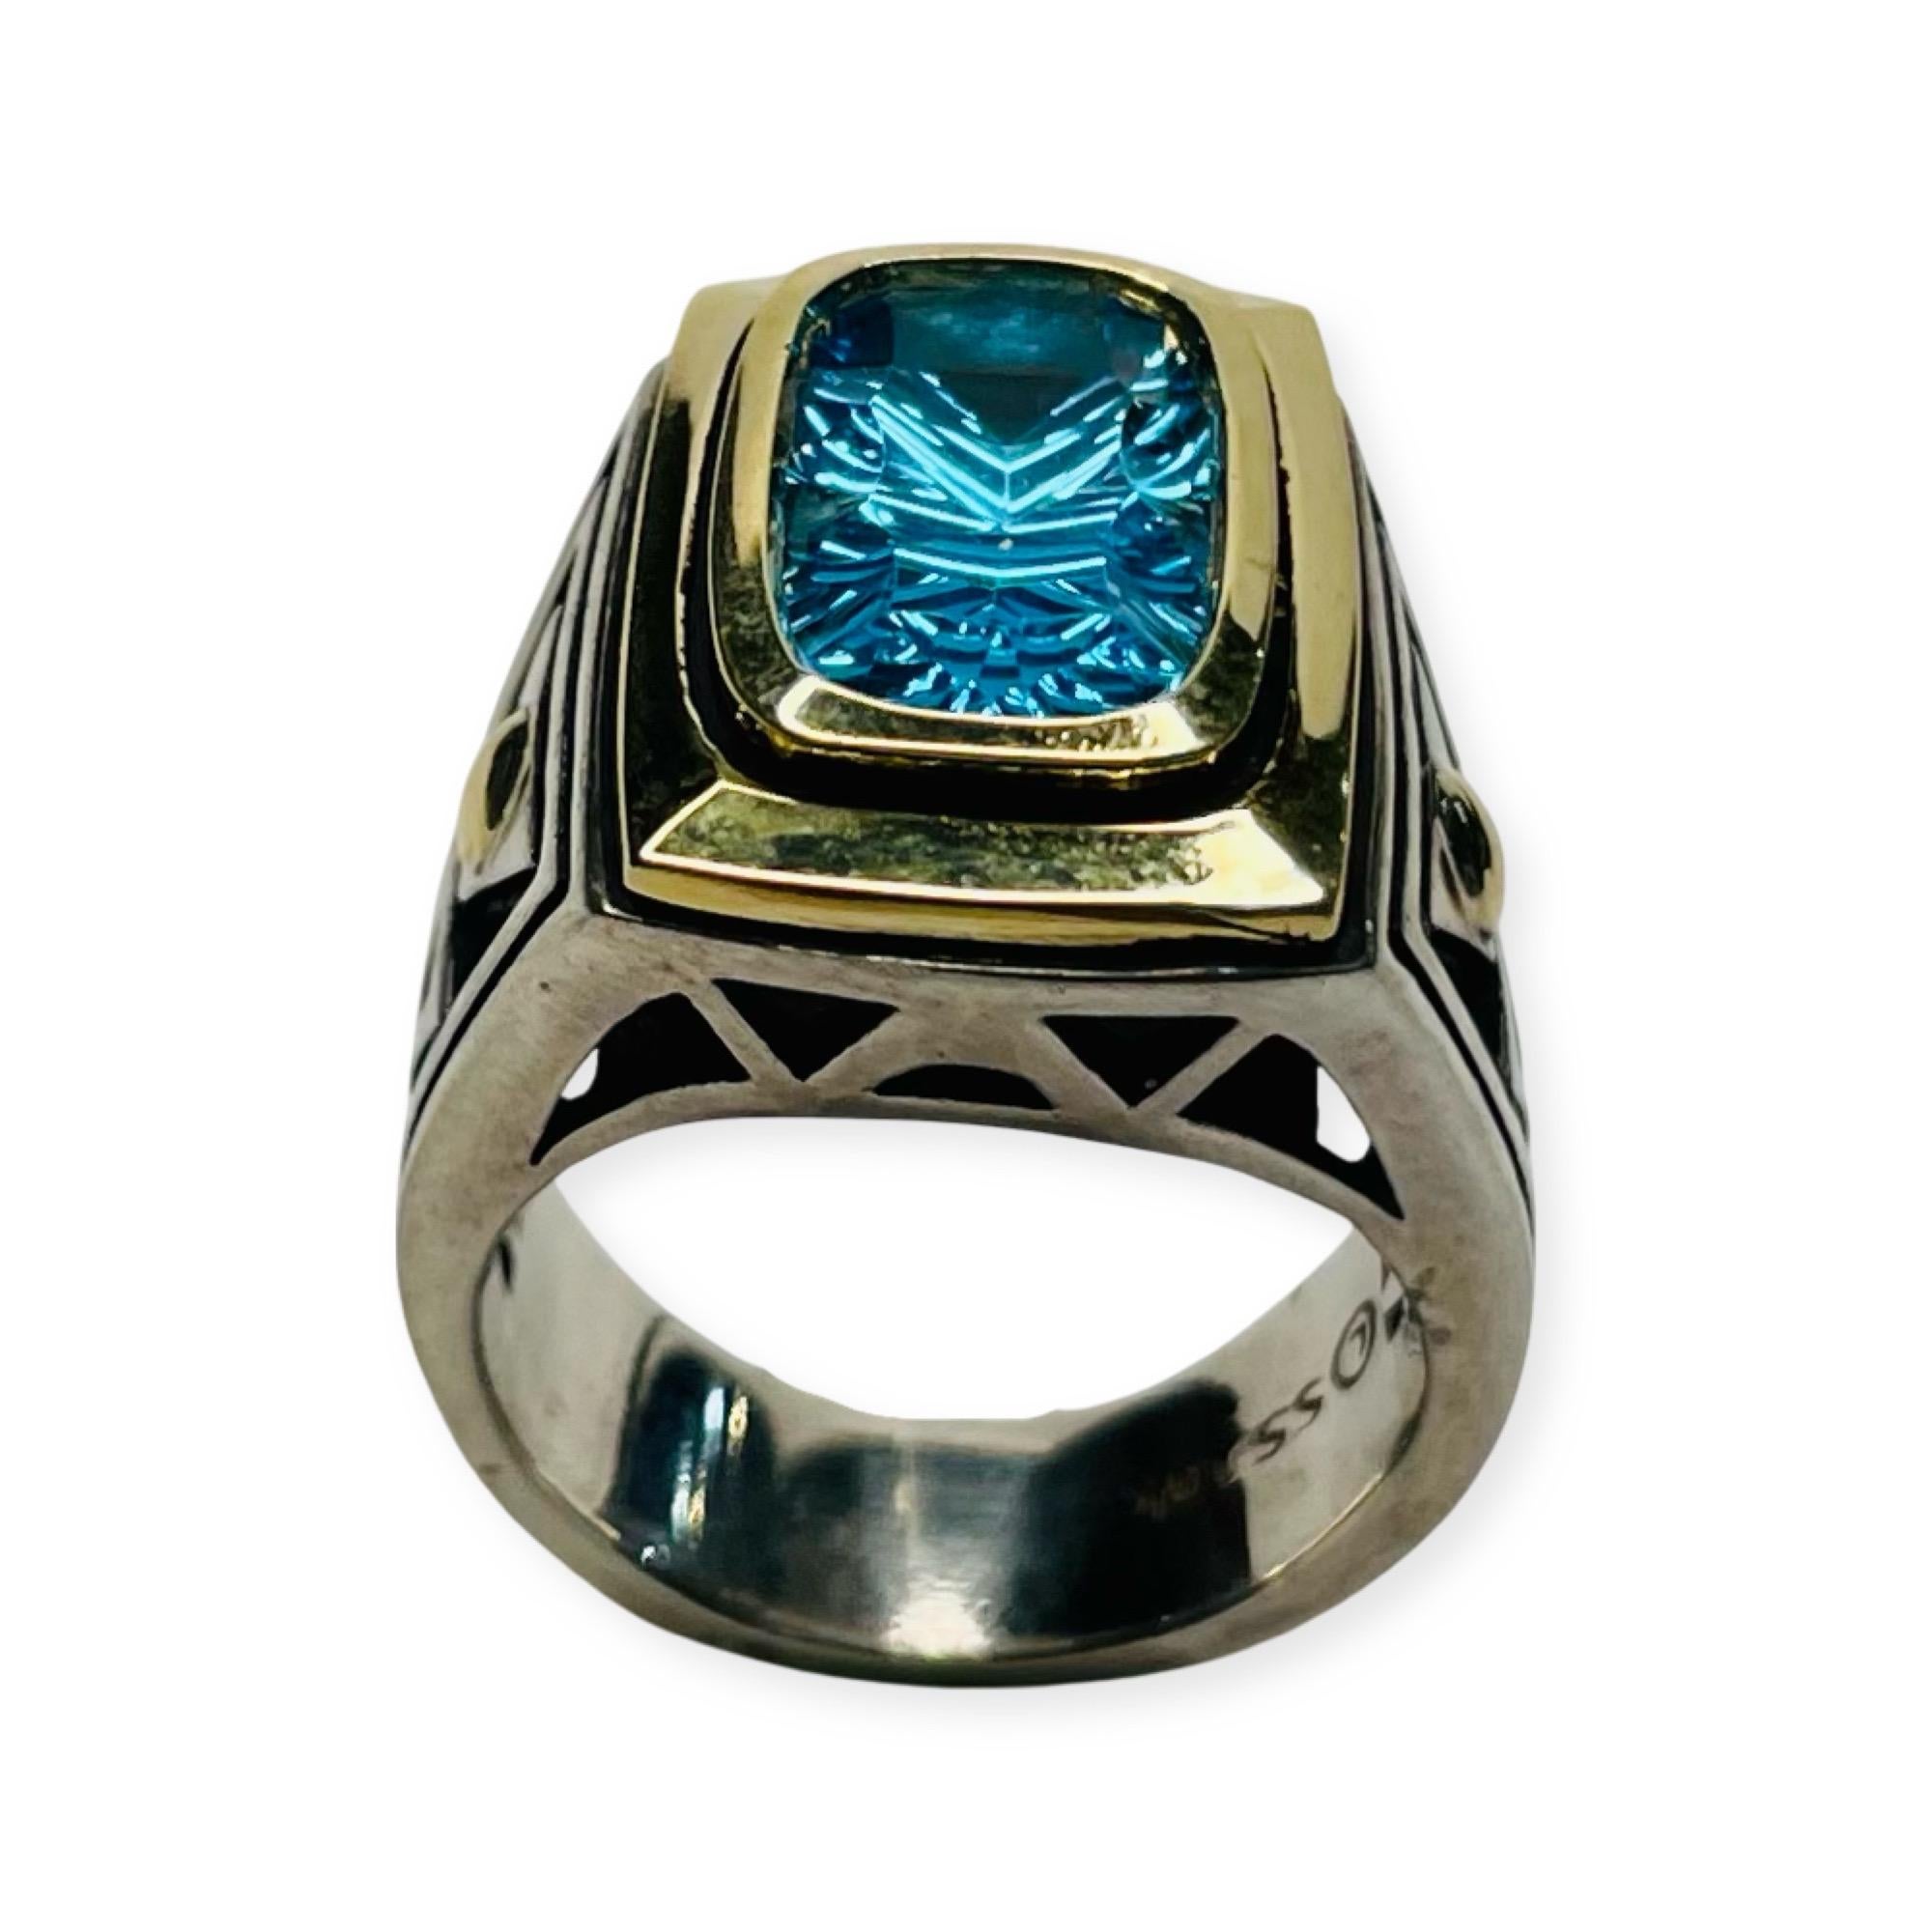 This ring is called “The Golden Gate Vertical Ring” by John Atencio.  It is 18KY gold and Sterling Silver.  There is a Faceted Blue Topaz measuring 17.0 mm x 15.0 mm.  It is bezel set on the vertical in 18KY gold. The Hallmark is 18K and 925. The